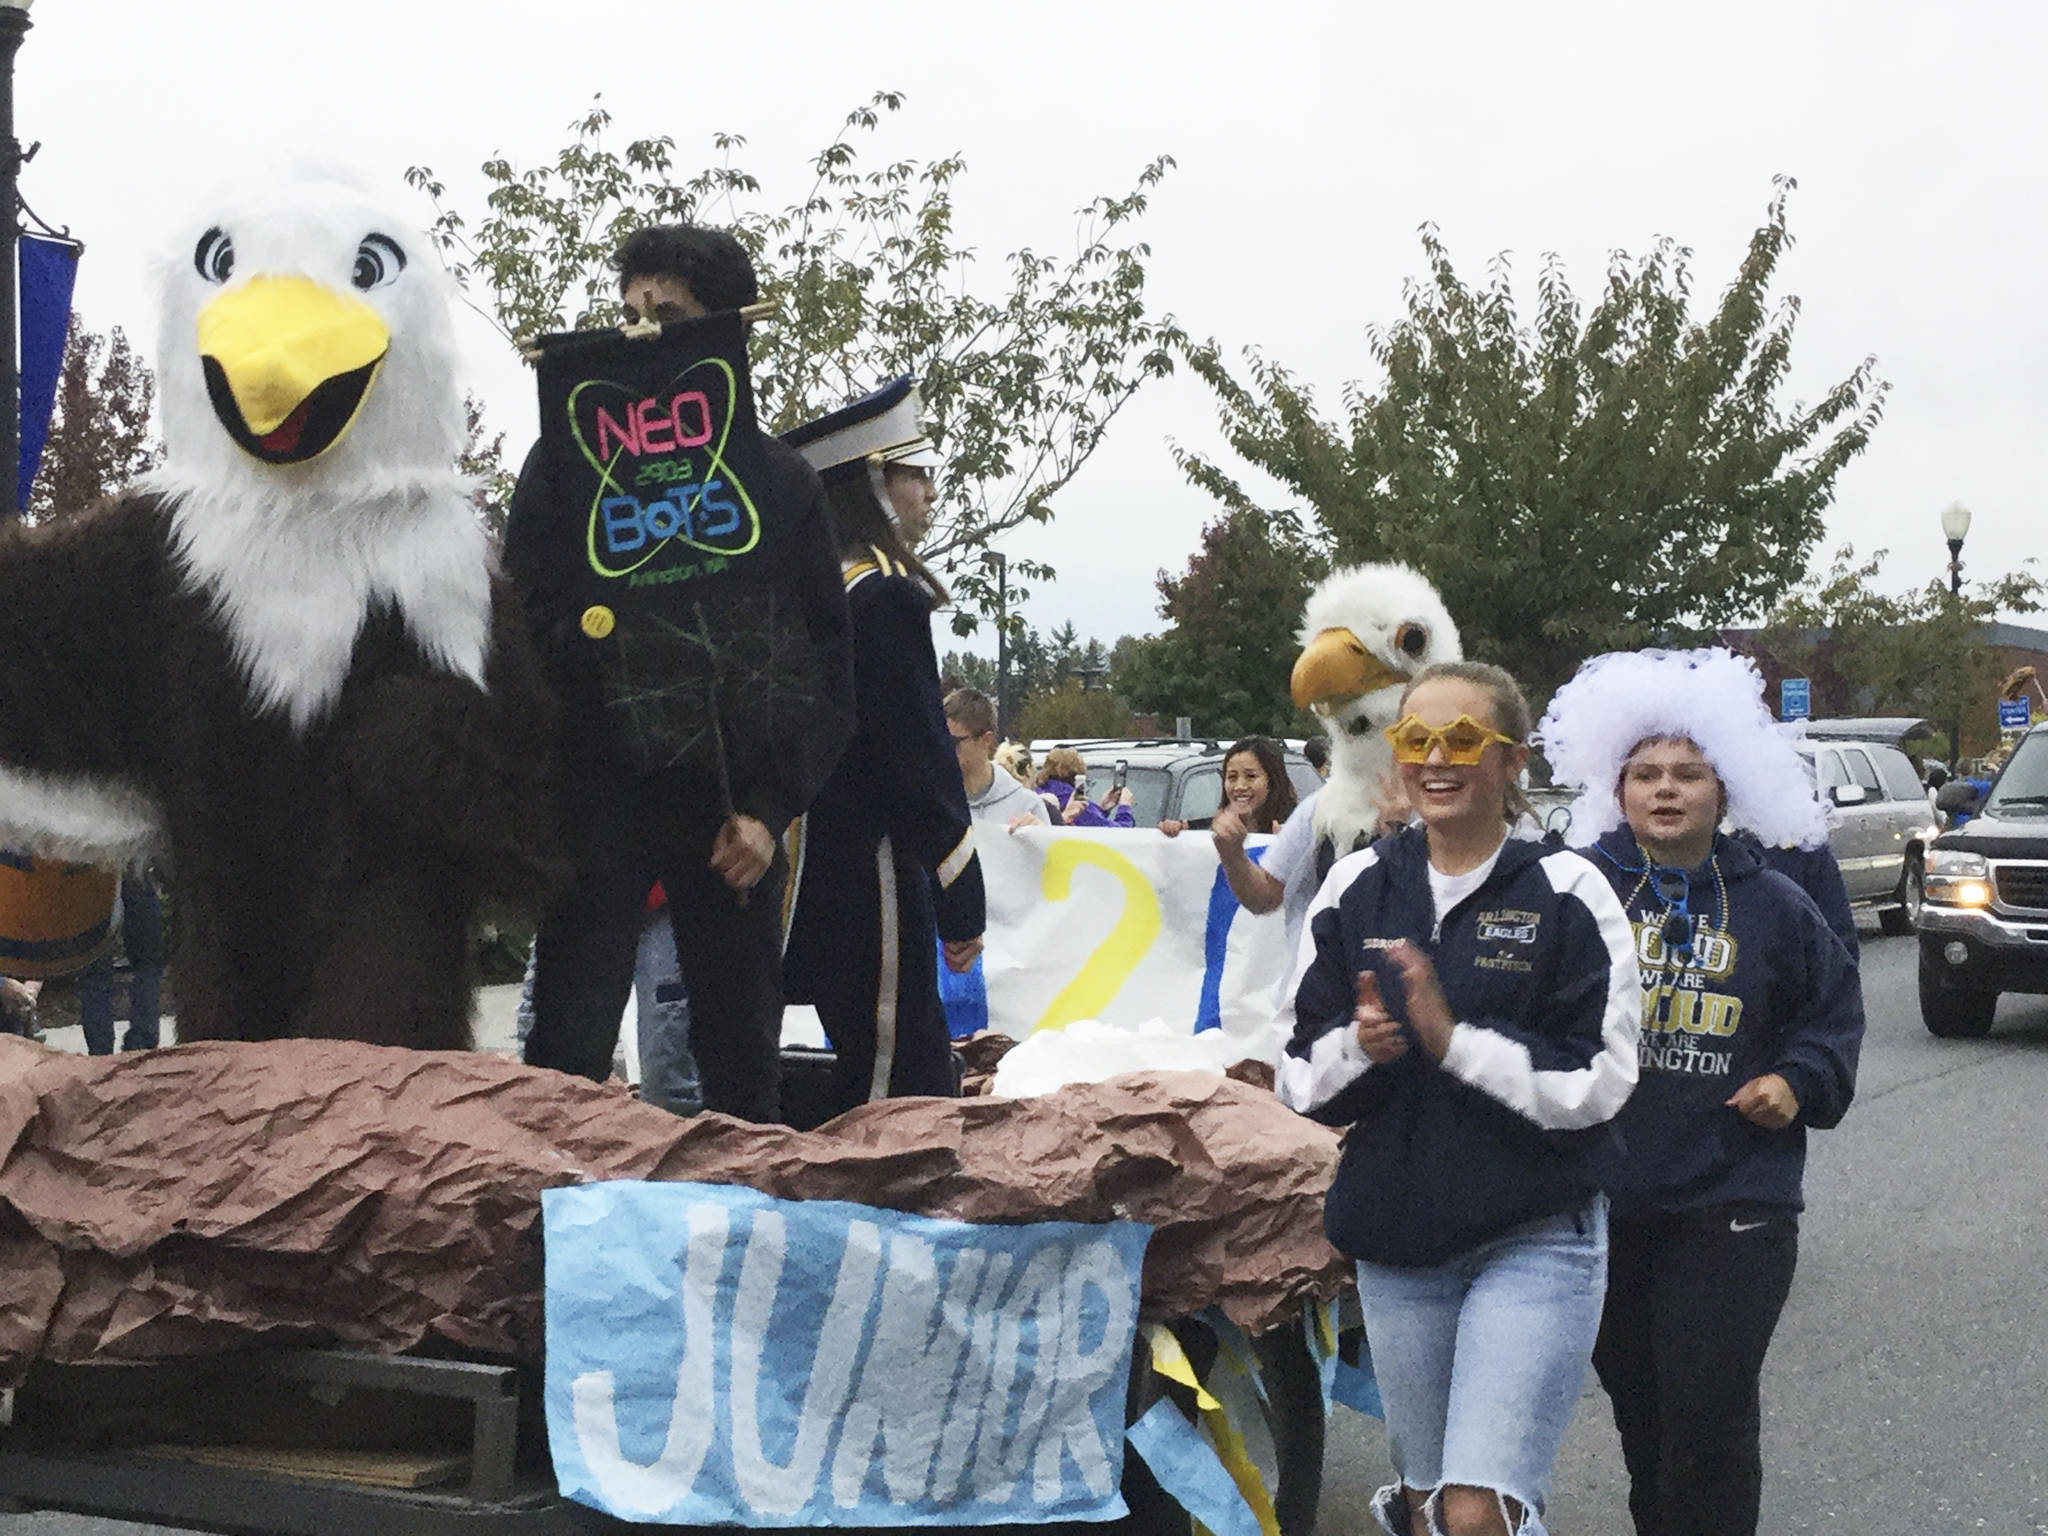 SLIDESHOW - Eagles land for homecoming parade in A-Town